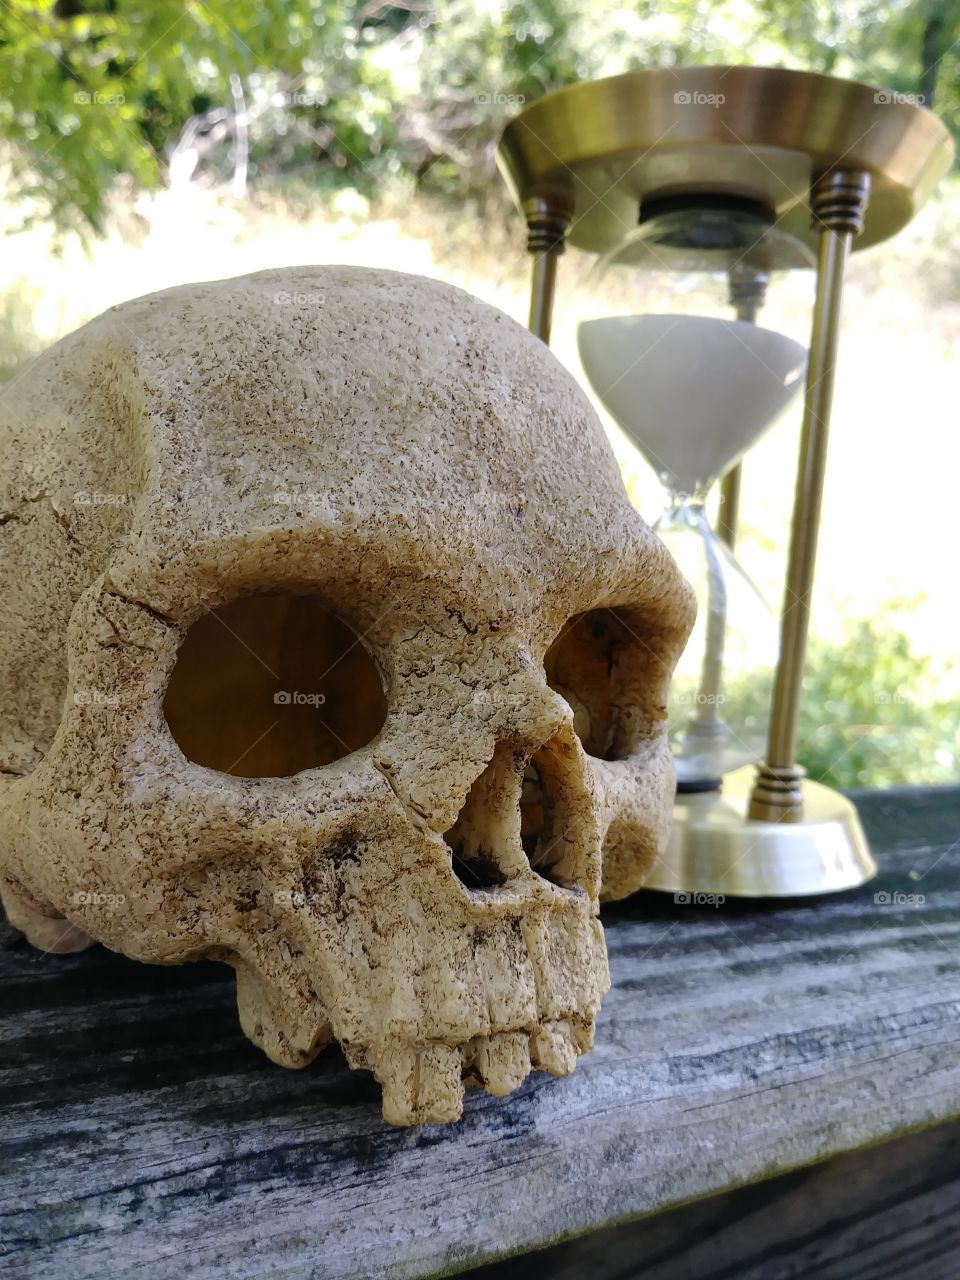 The image of a human skull sits with an hourglass under dappled light. Time waits for no man.